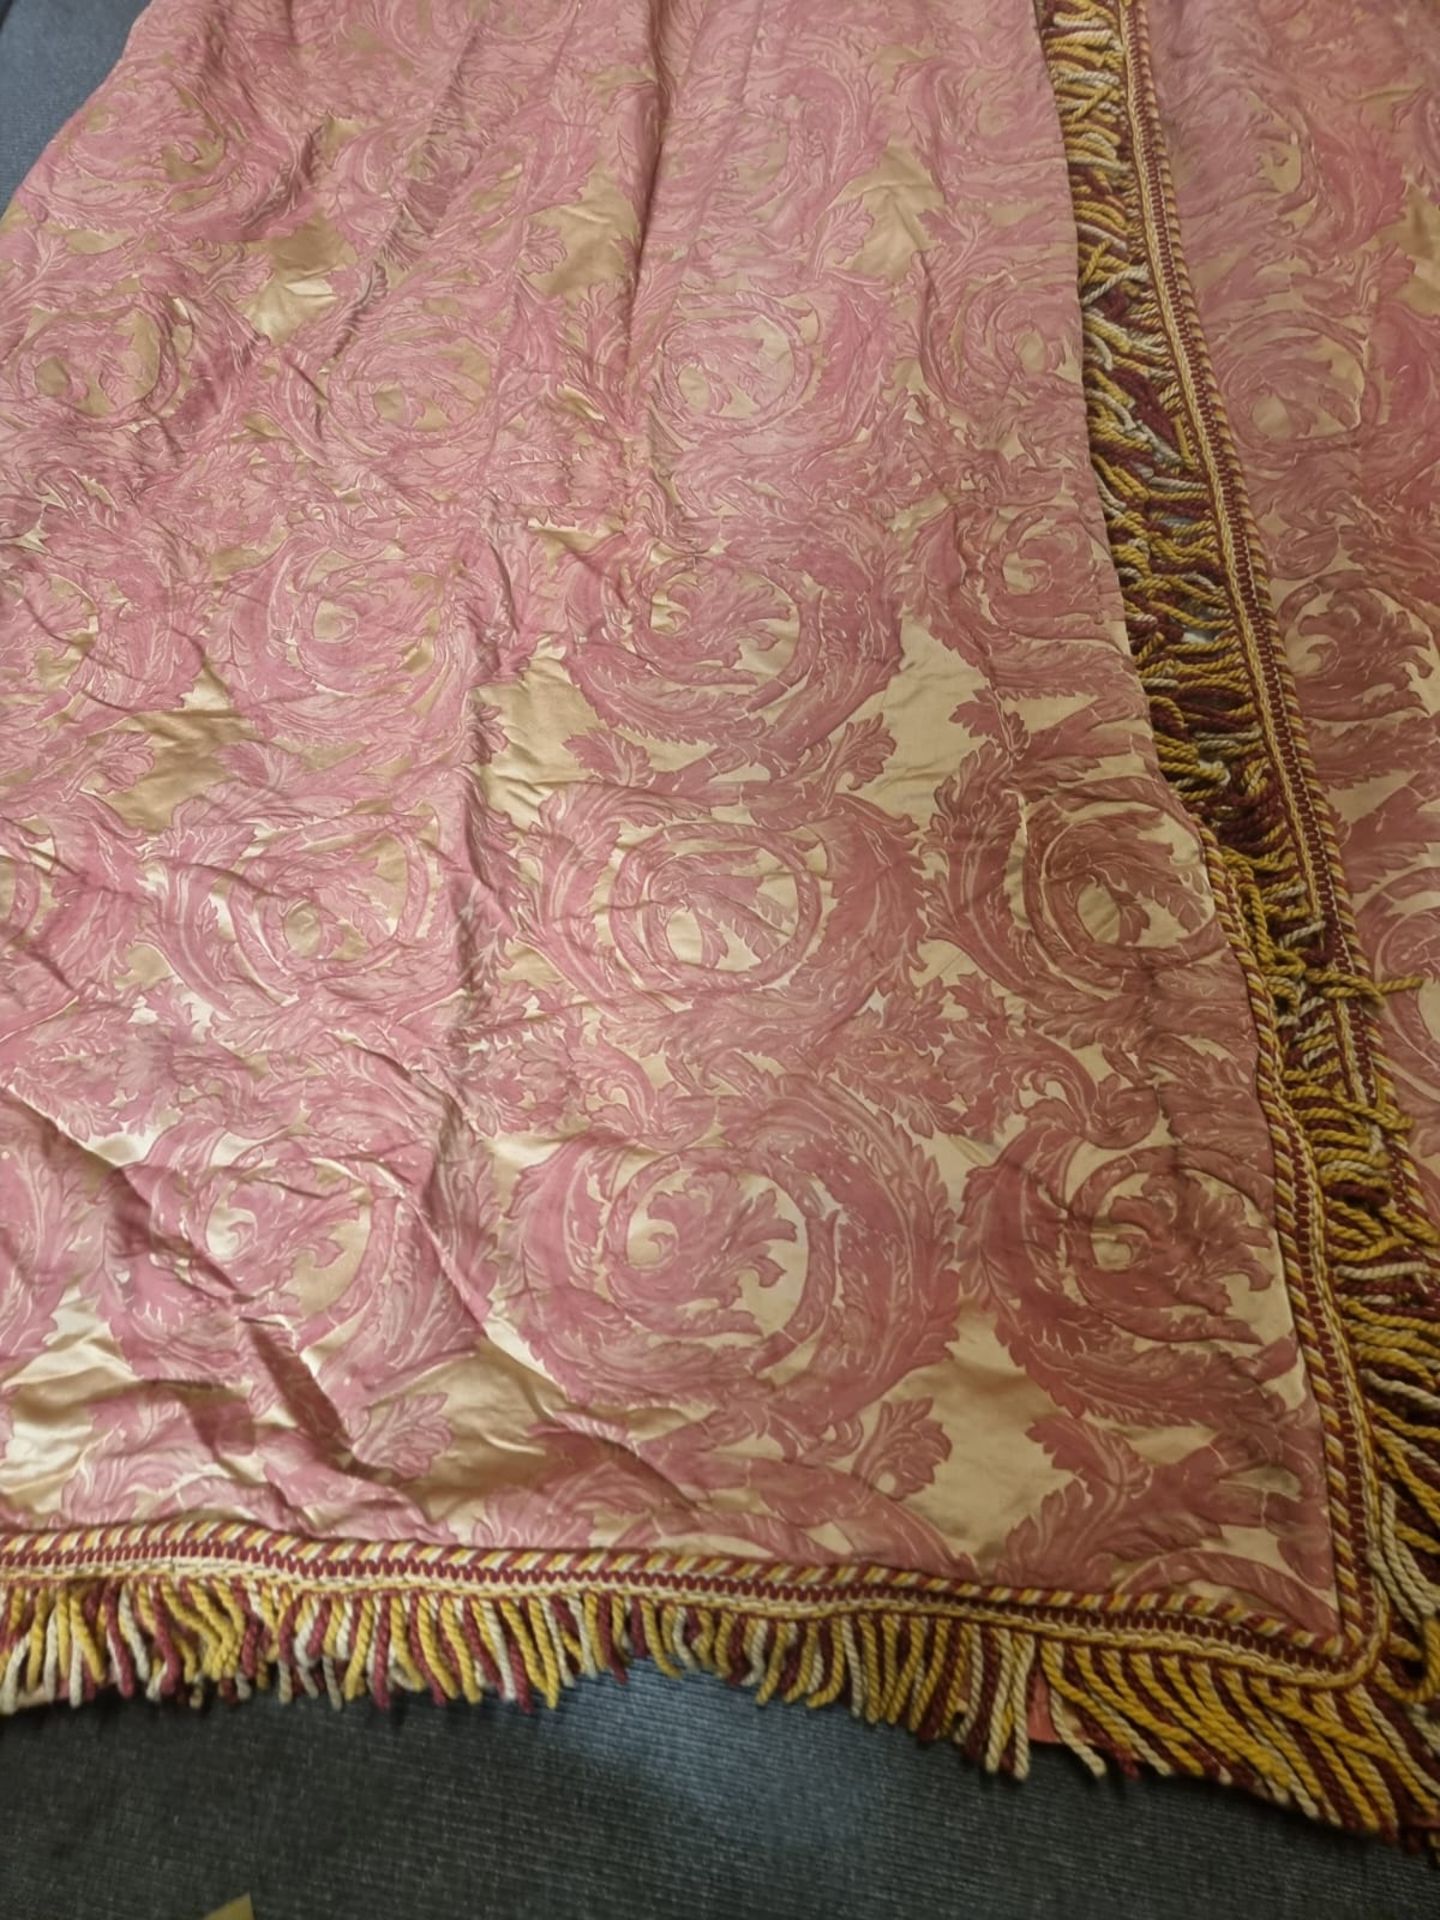 2 x panels of heavy cotton pencil pleat lined drapes with gold and red pattern with a pelmet top - Image 4 of 5